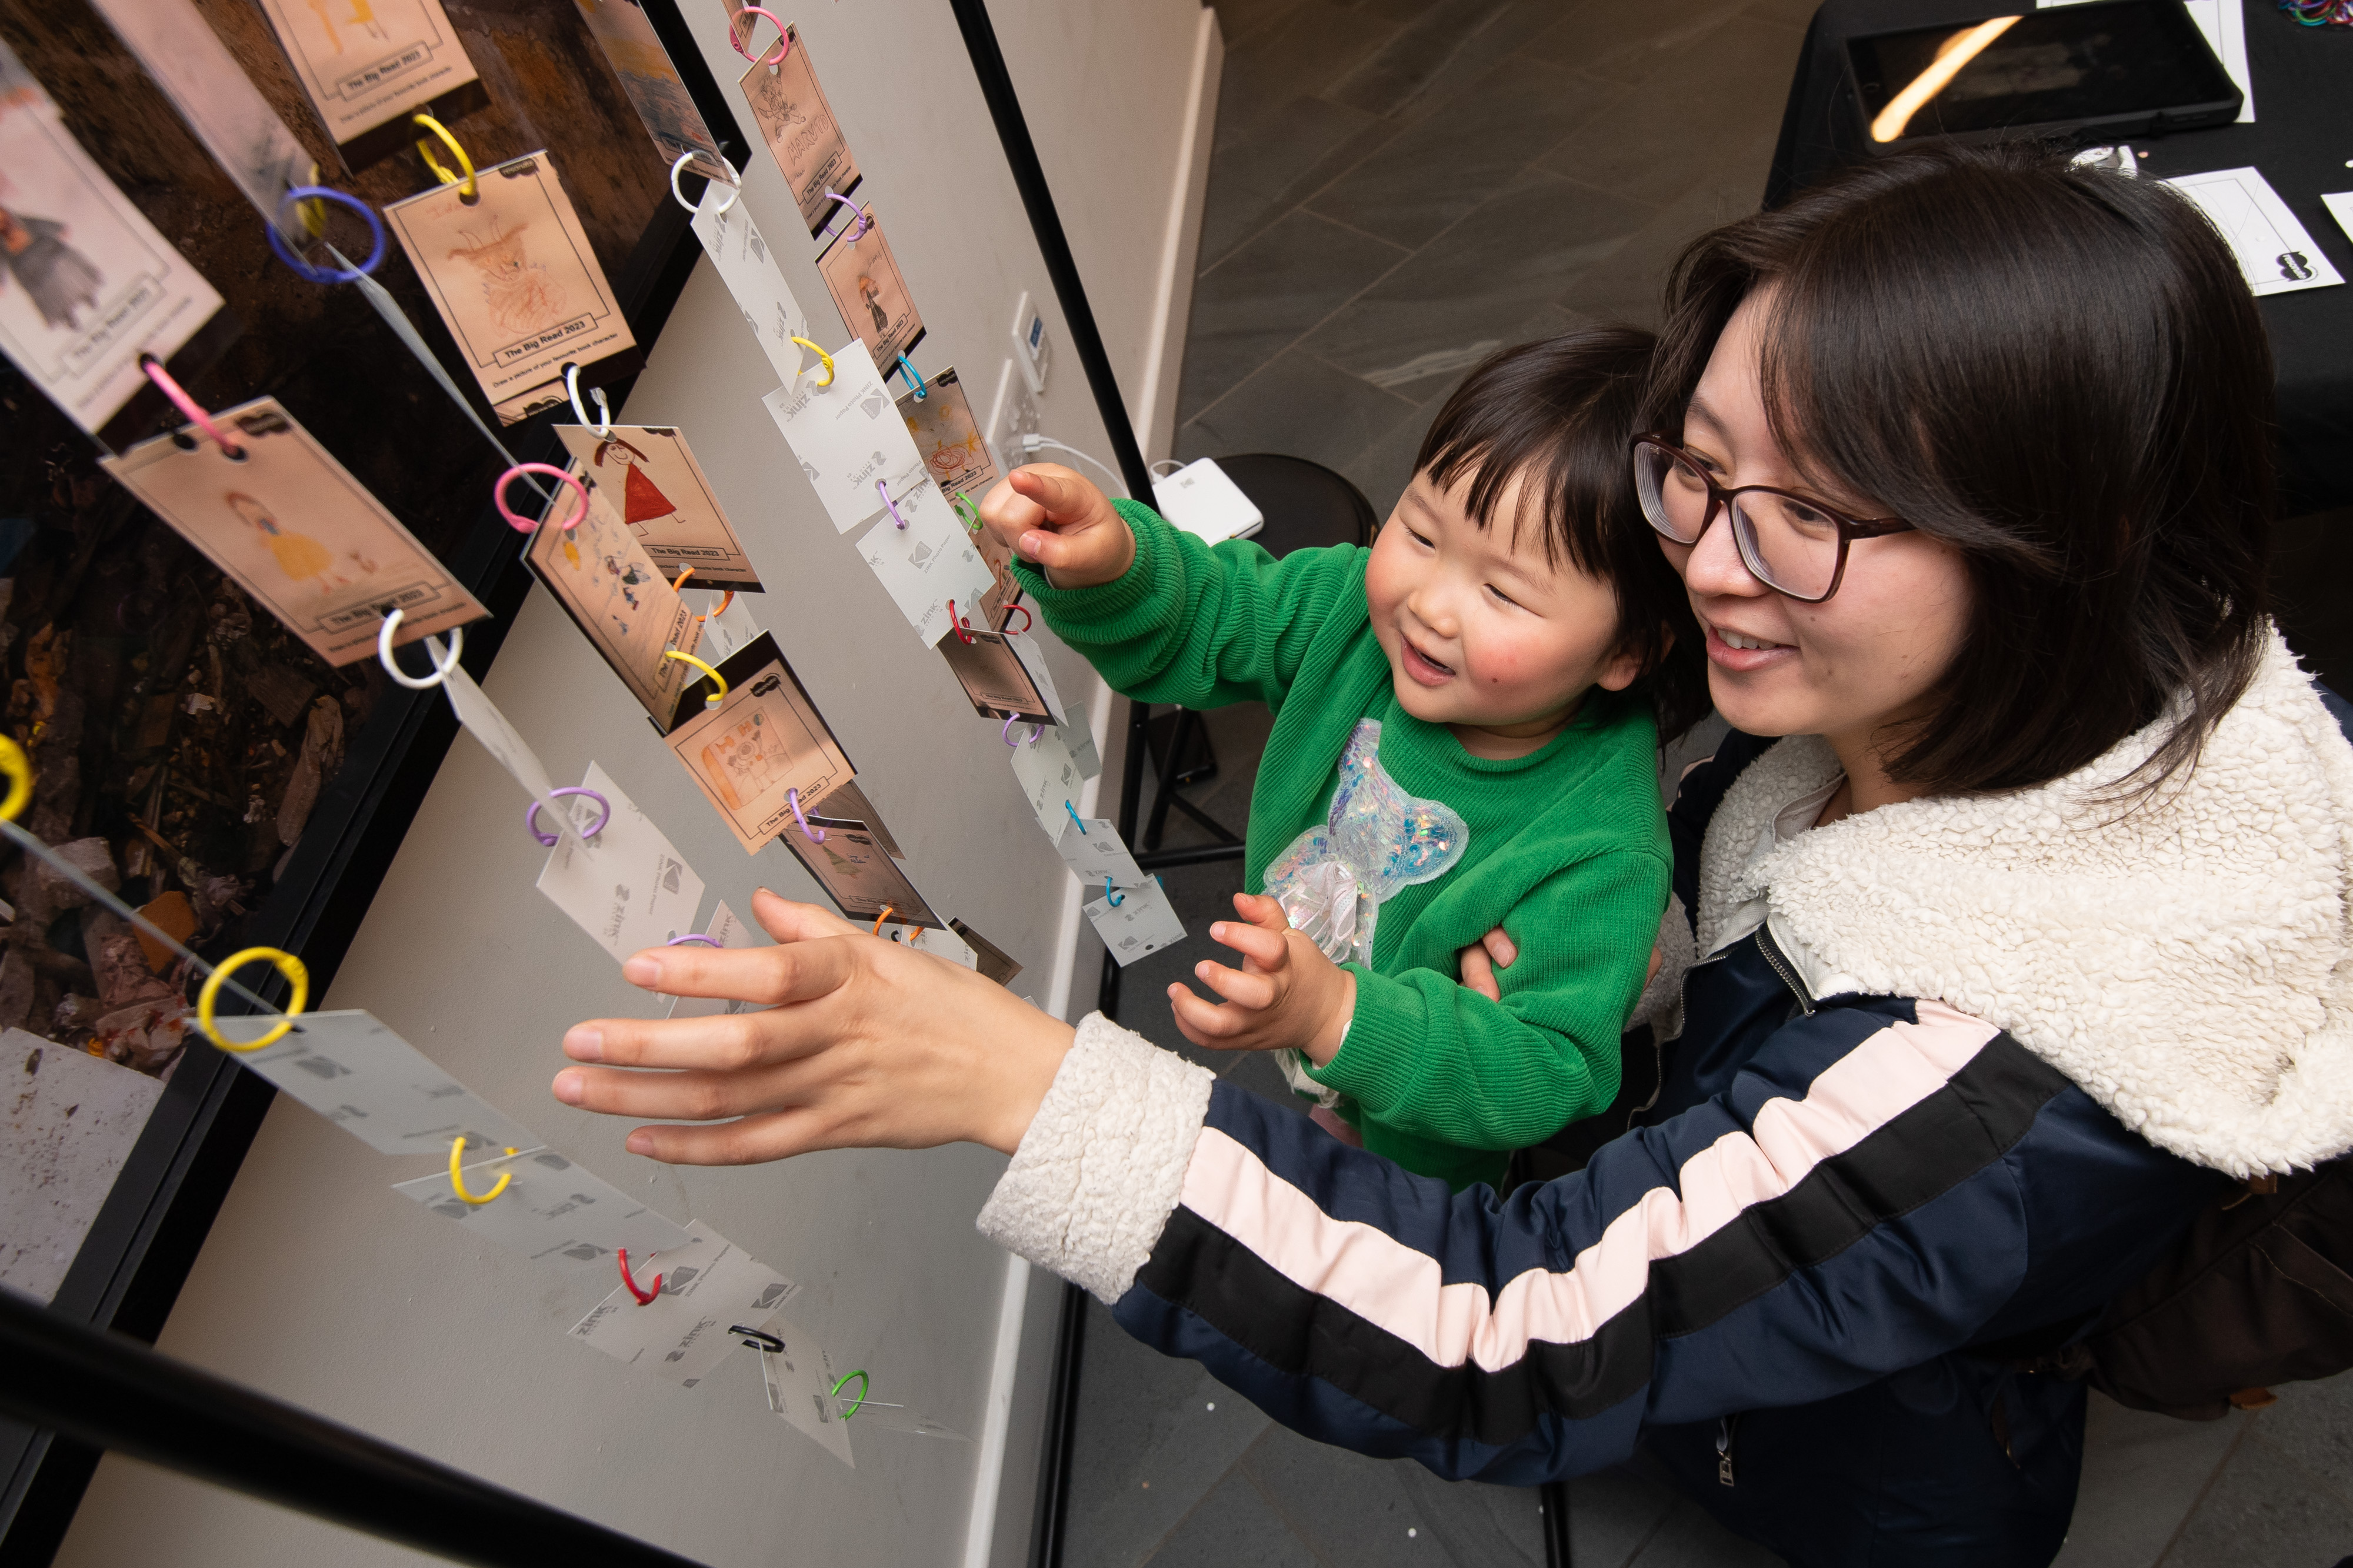 Free family activities and thought-provoking events to return in University of Warwick's jam-packed public events programme